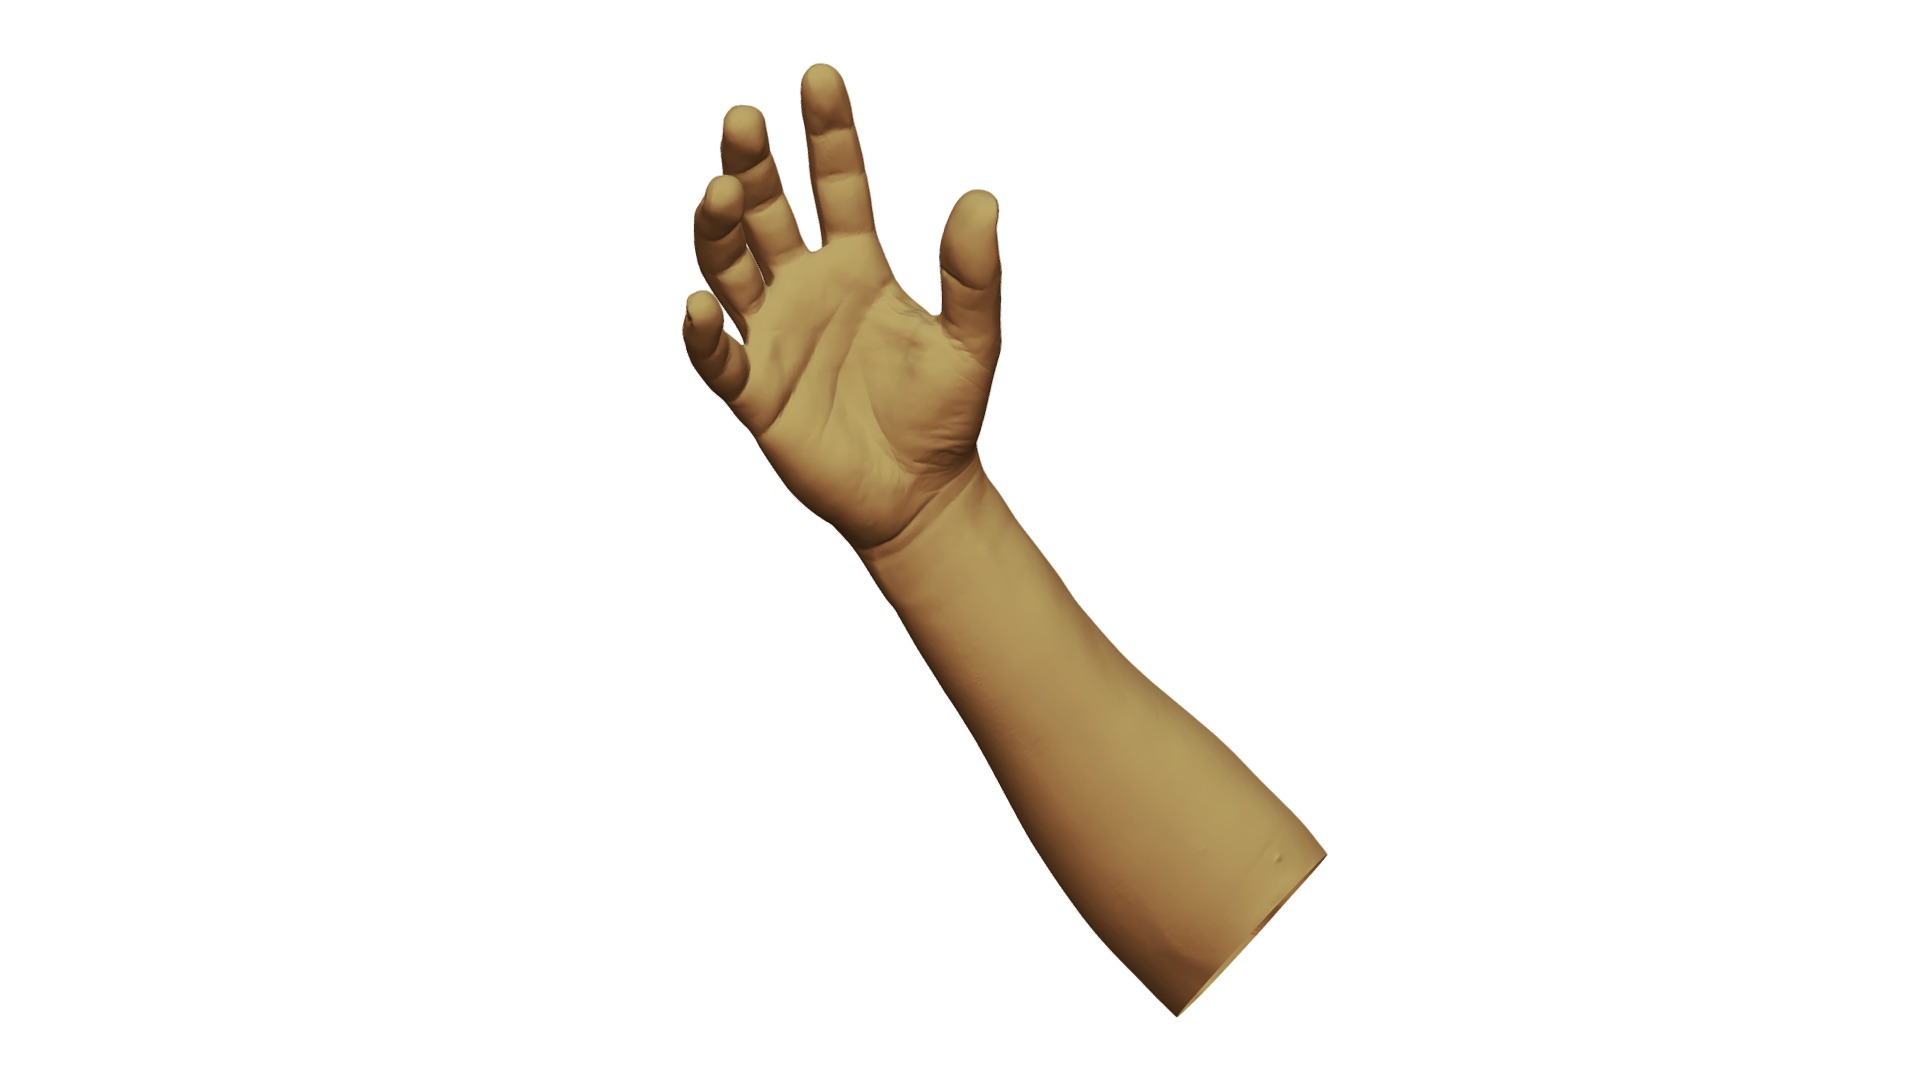 3D model Forearm / Lower-arm / Arm / Hand - This is a 3D model of the Forearm / Lower-arm / Arm / Hand. The 3D model is about a hand with a thumb up.